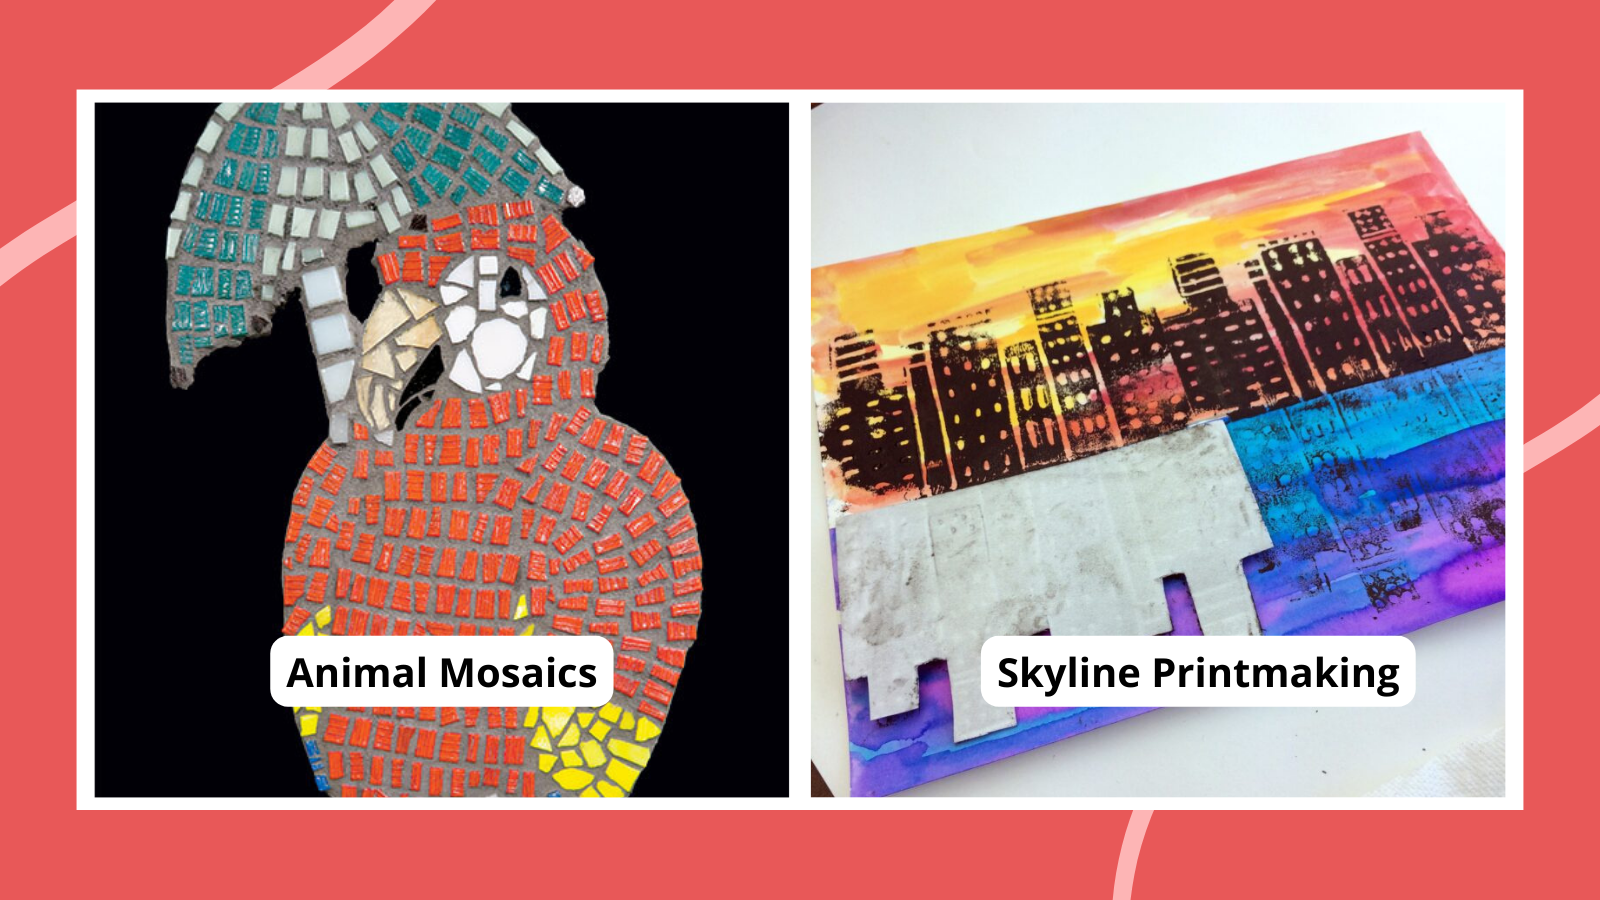 Examples of art projects for middle schoolers, including animal mosaics and skyline printmaking.